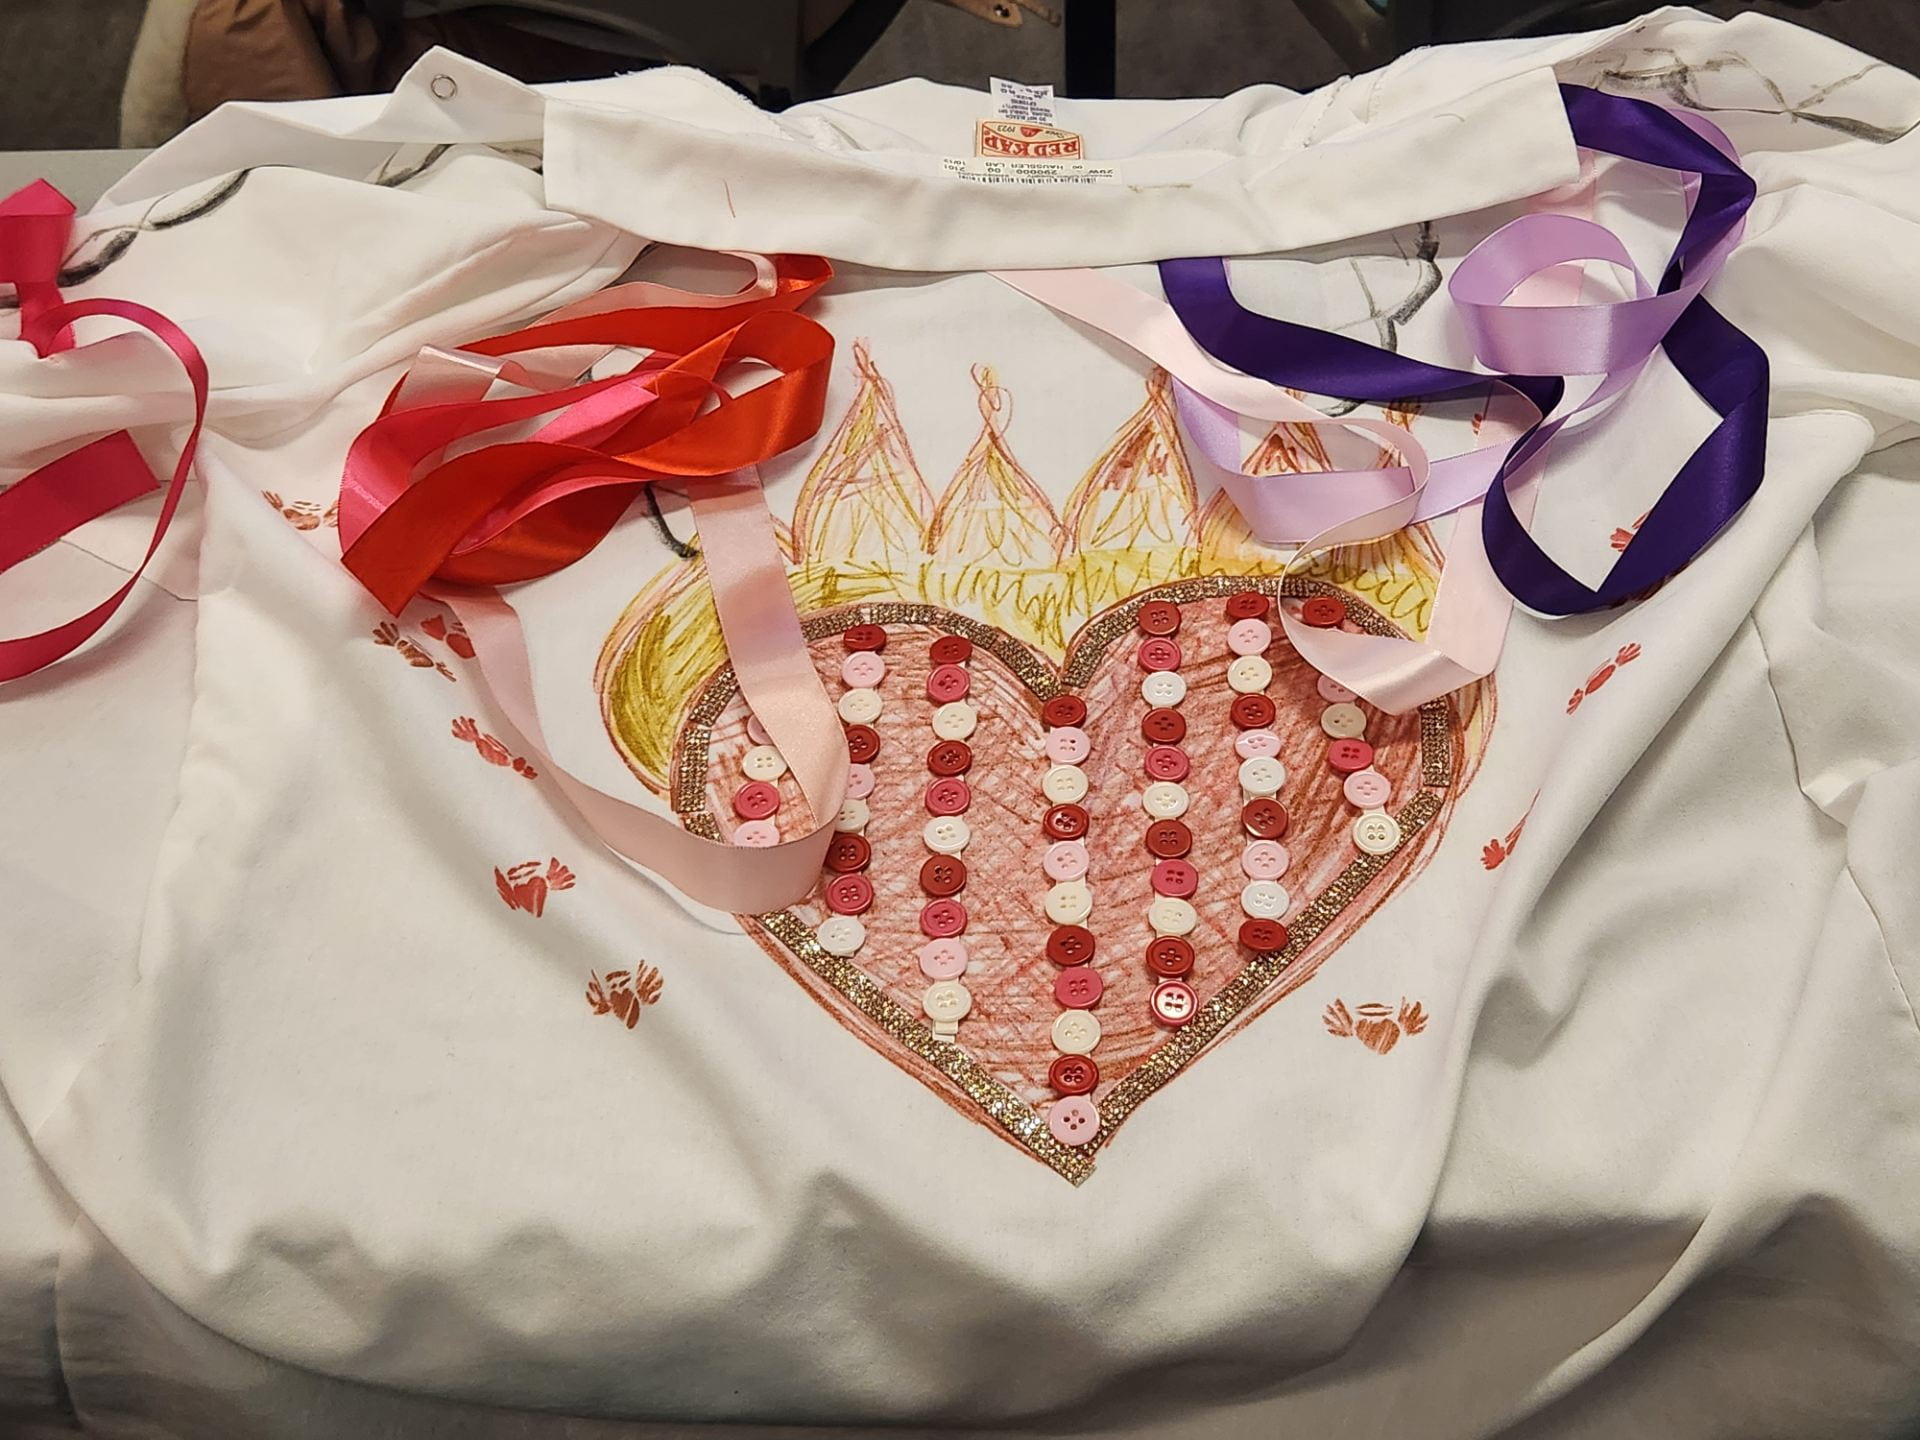 A lab coat decorated with a flaming heart on the back. The heart is filled in with red and white buttons.